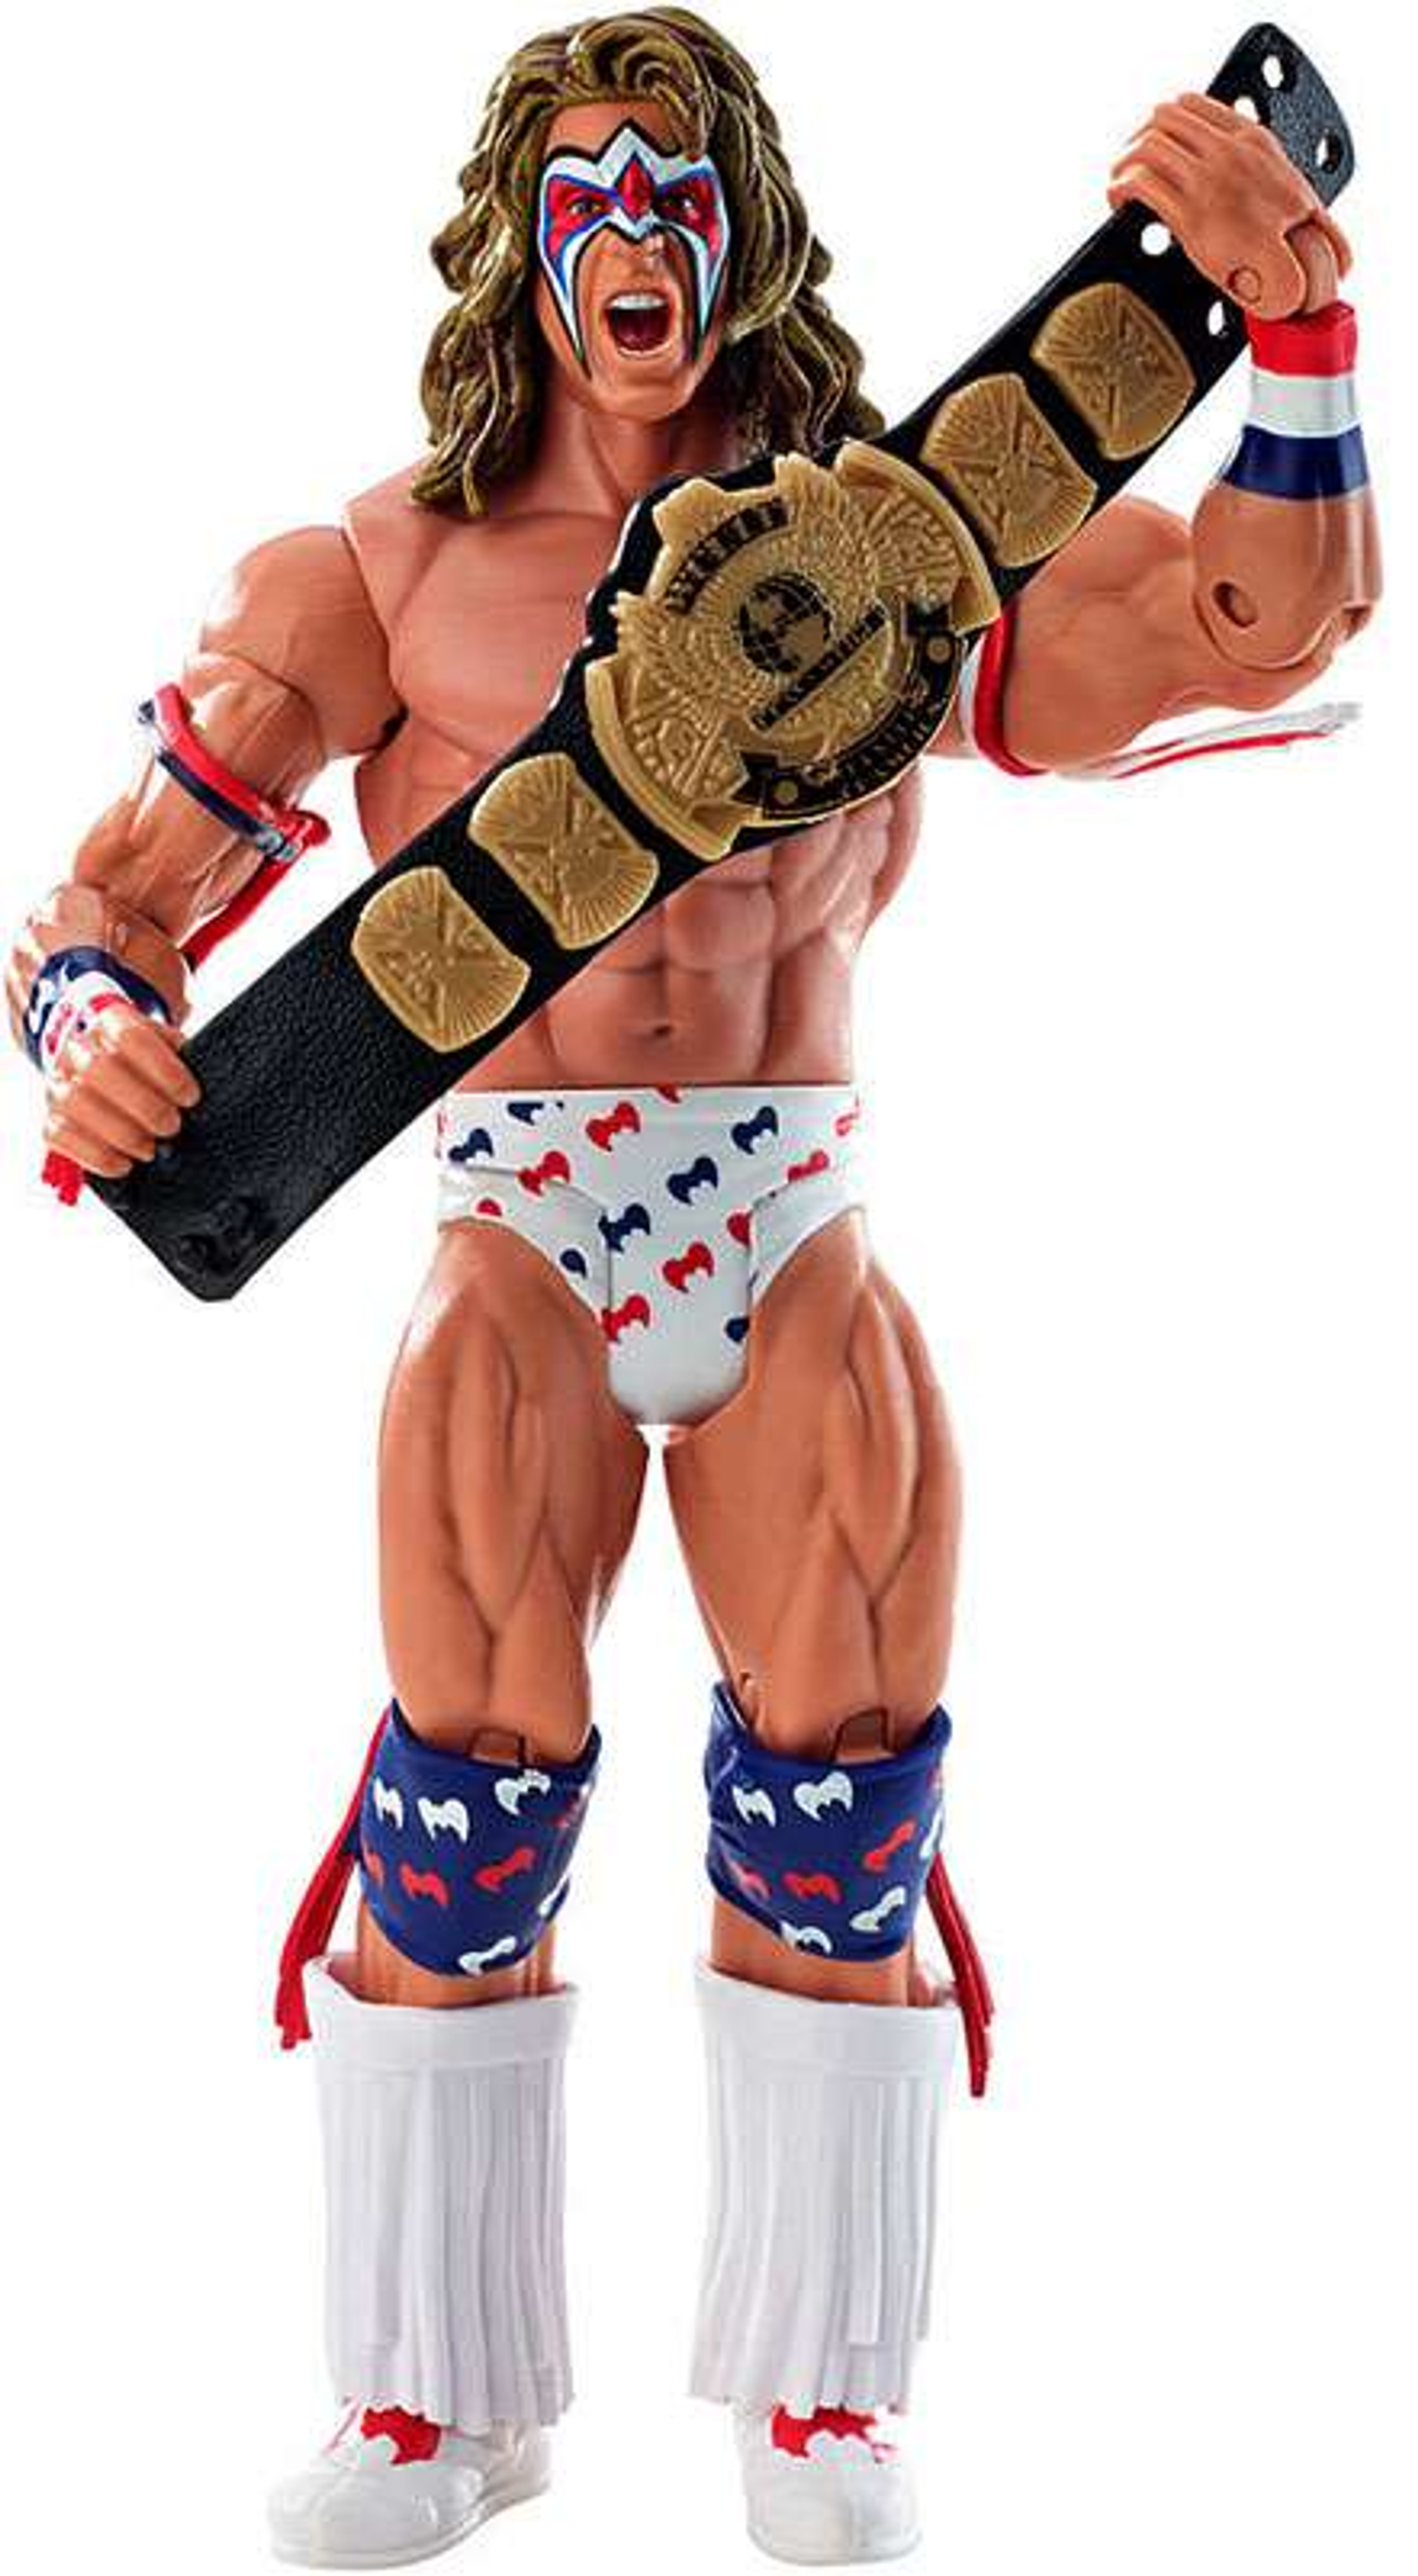 WWE Wrestling Champions Ultimate Warrior Exclusive Action Figure Winged